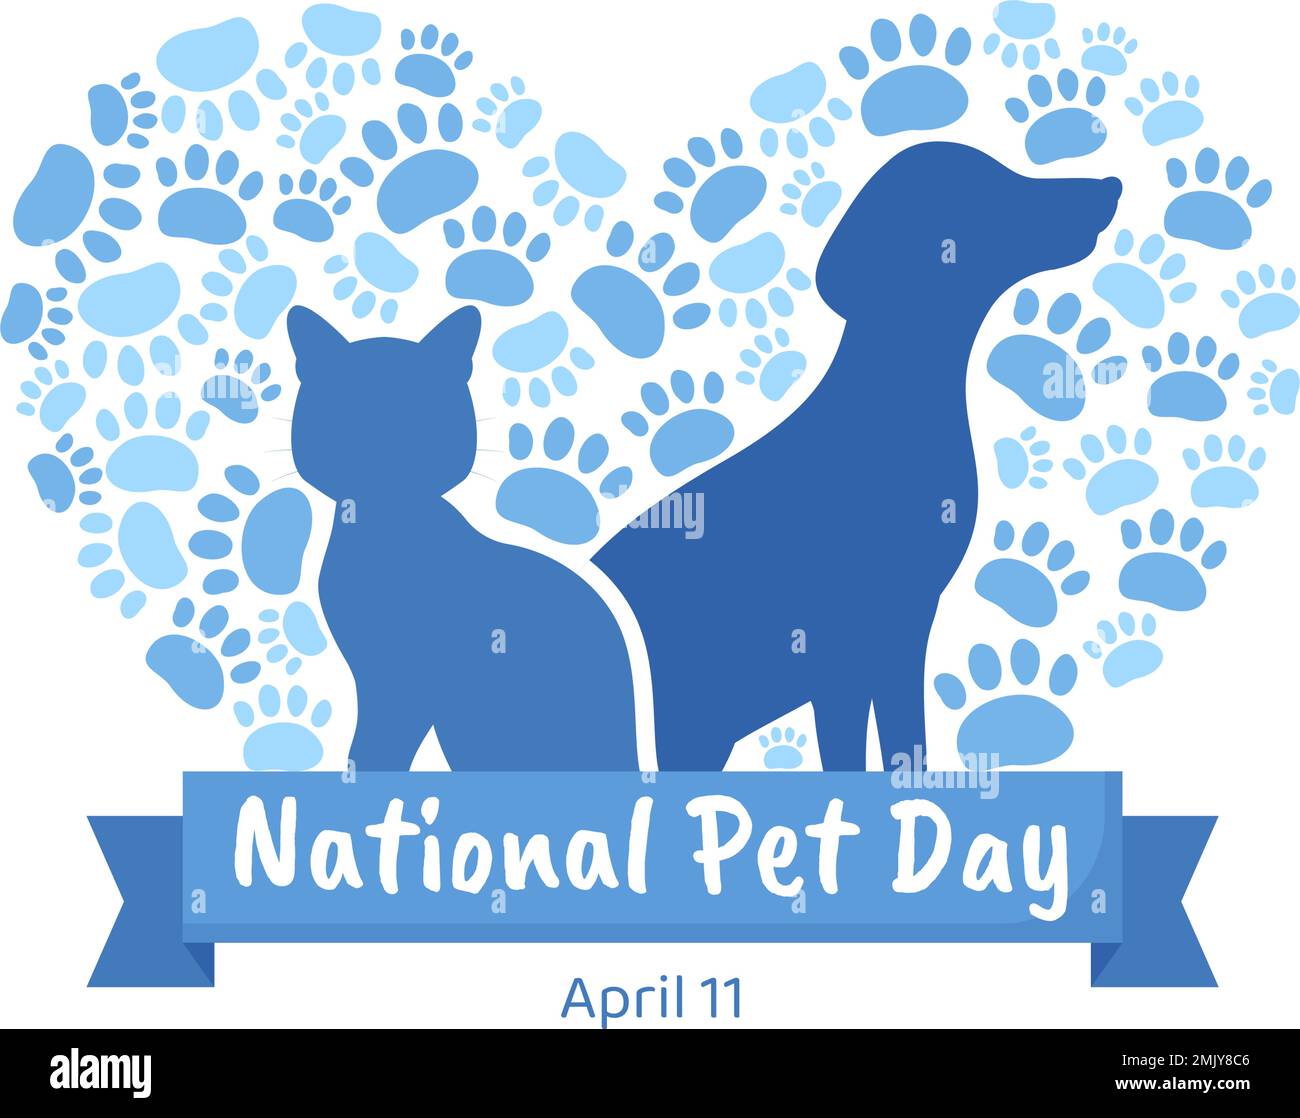 National Pet Day on April 11 Illustration with Cute Pets of Cats and